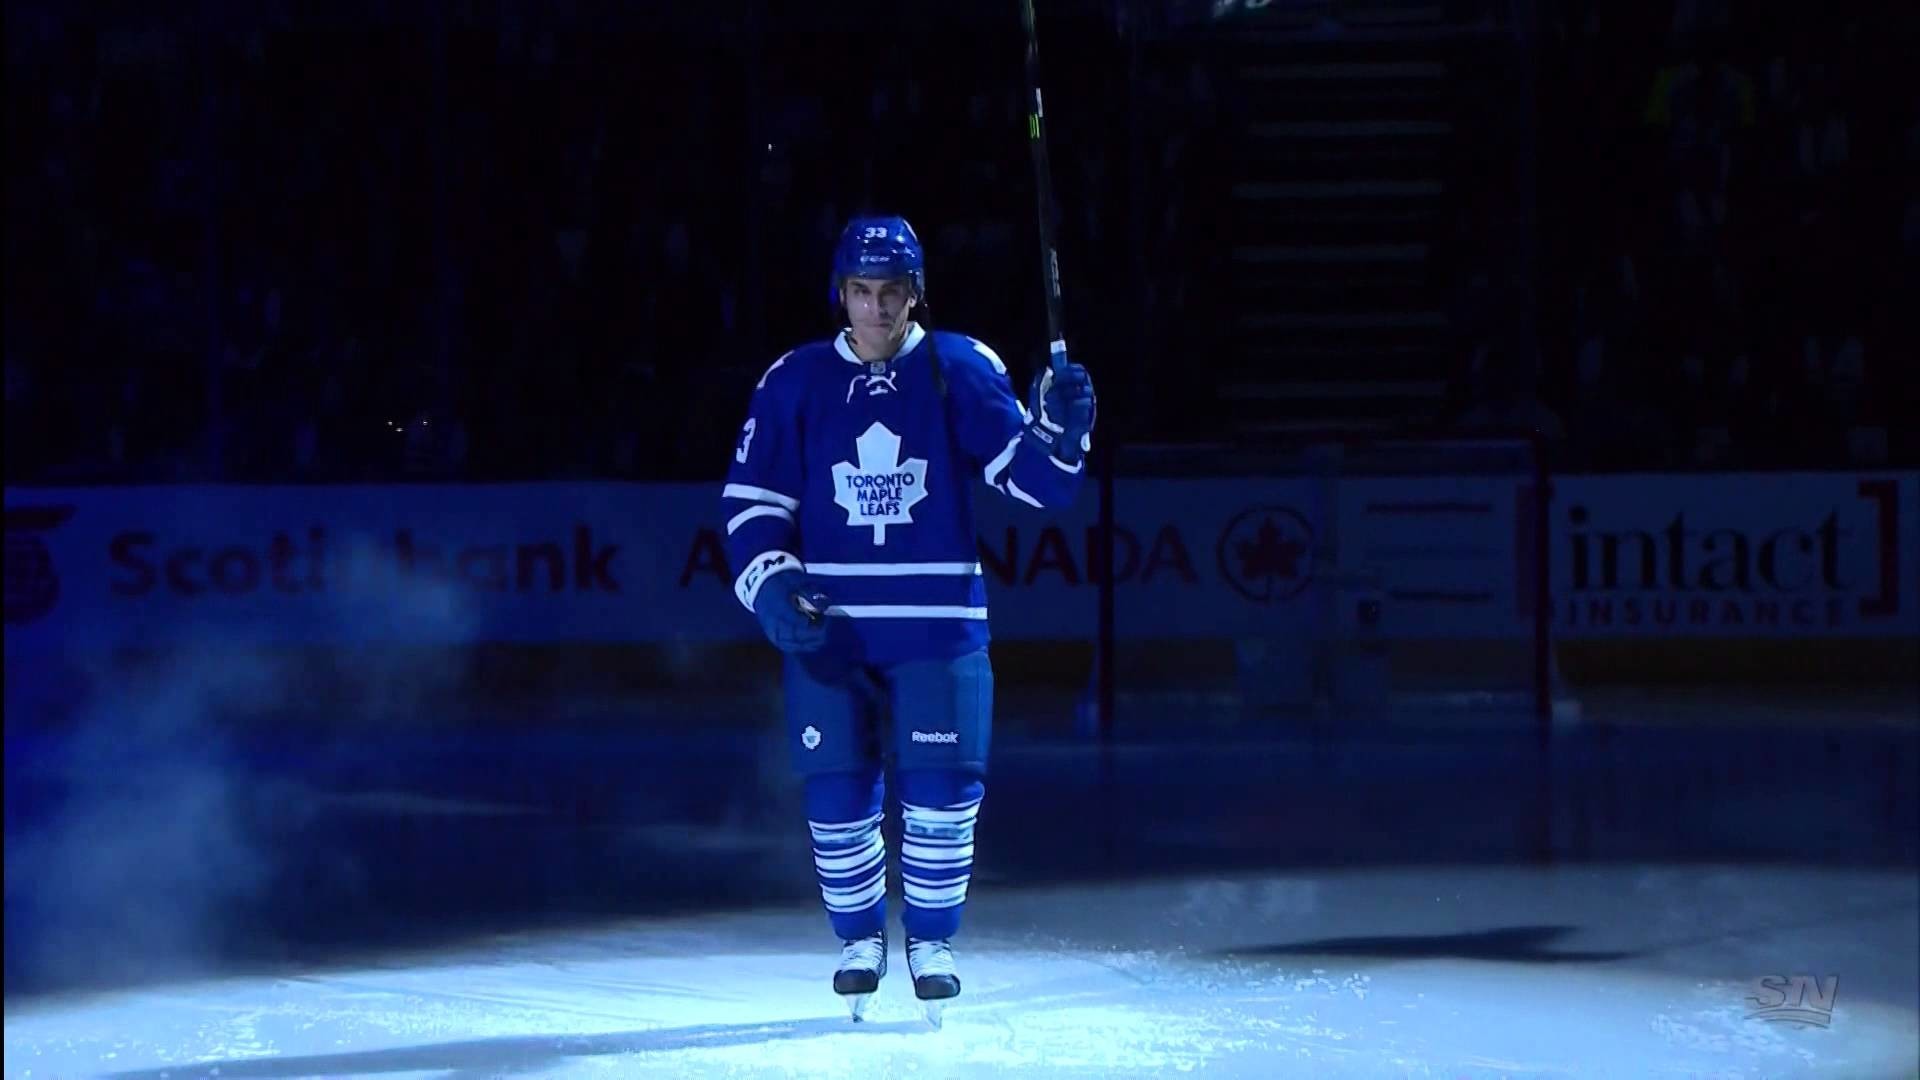 1920x1080  Toronto Maple Leafs 99th Season Opener - Player Introductions -  Oct 7th 2015 (HD